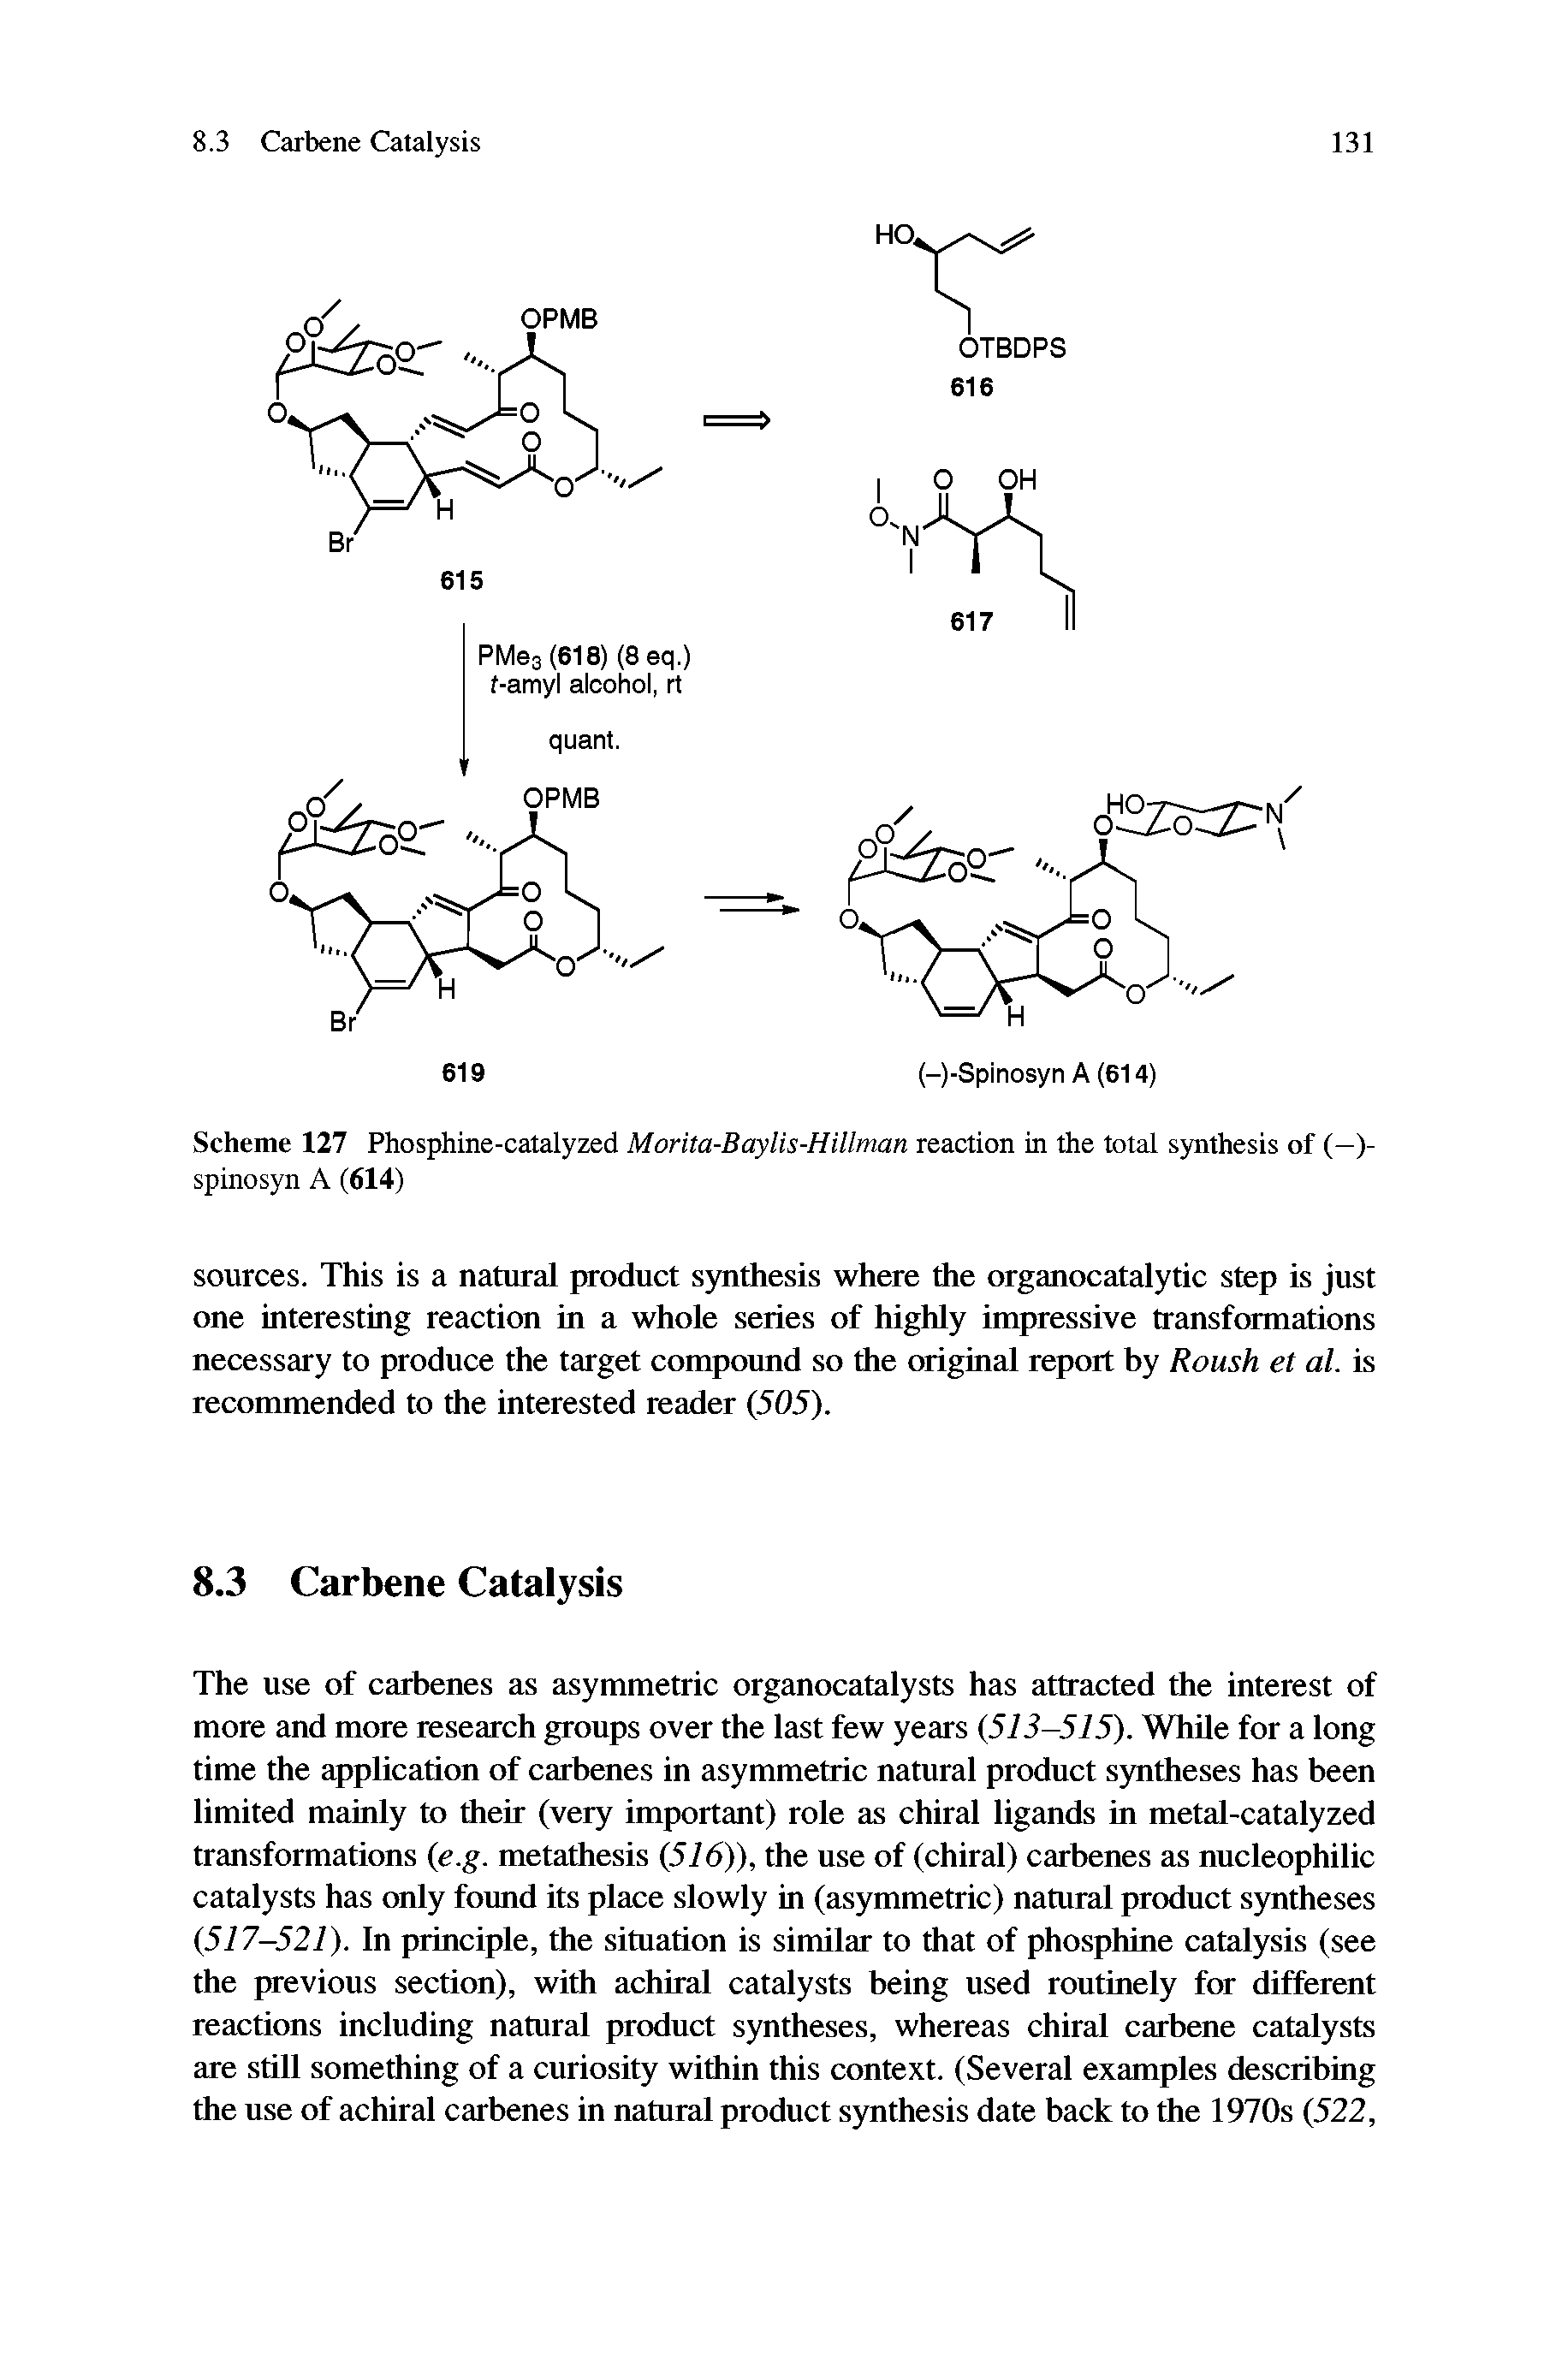 Scheme 127 Phosphine-catalyzed Morita-Baylis-Hillman reaction in the total synthesis of (—)-spinosyn A (614)...